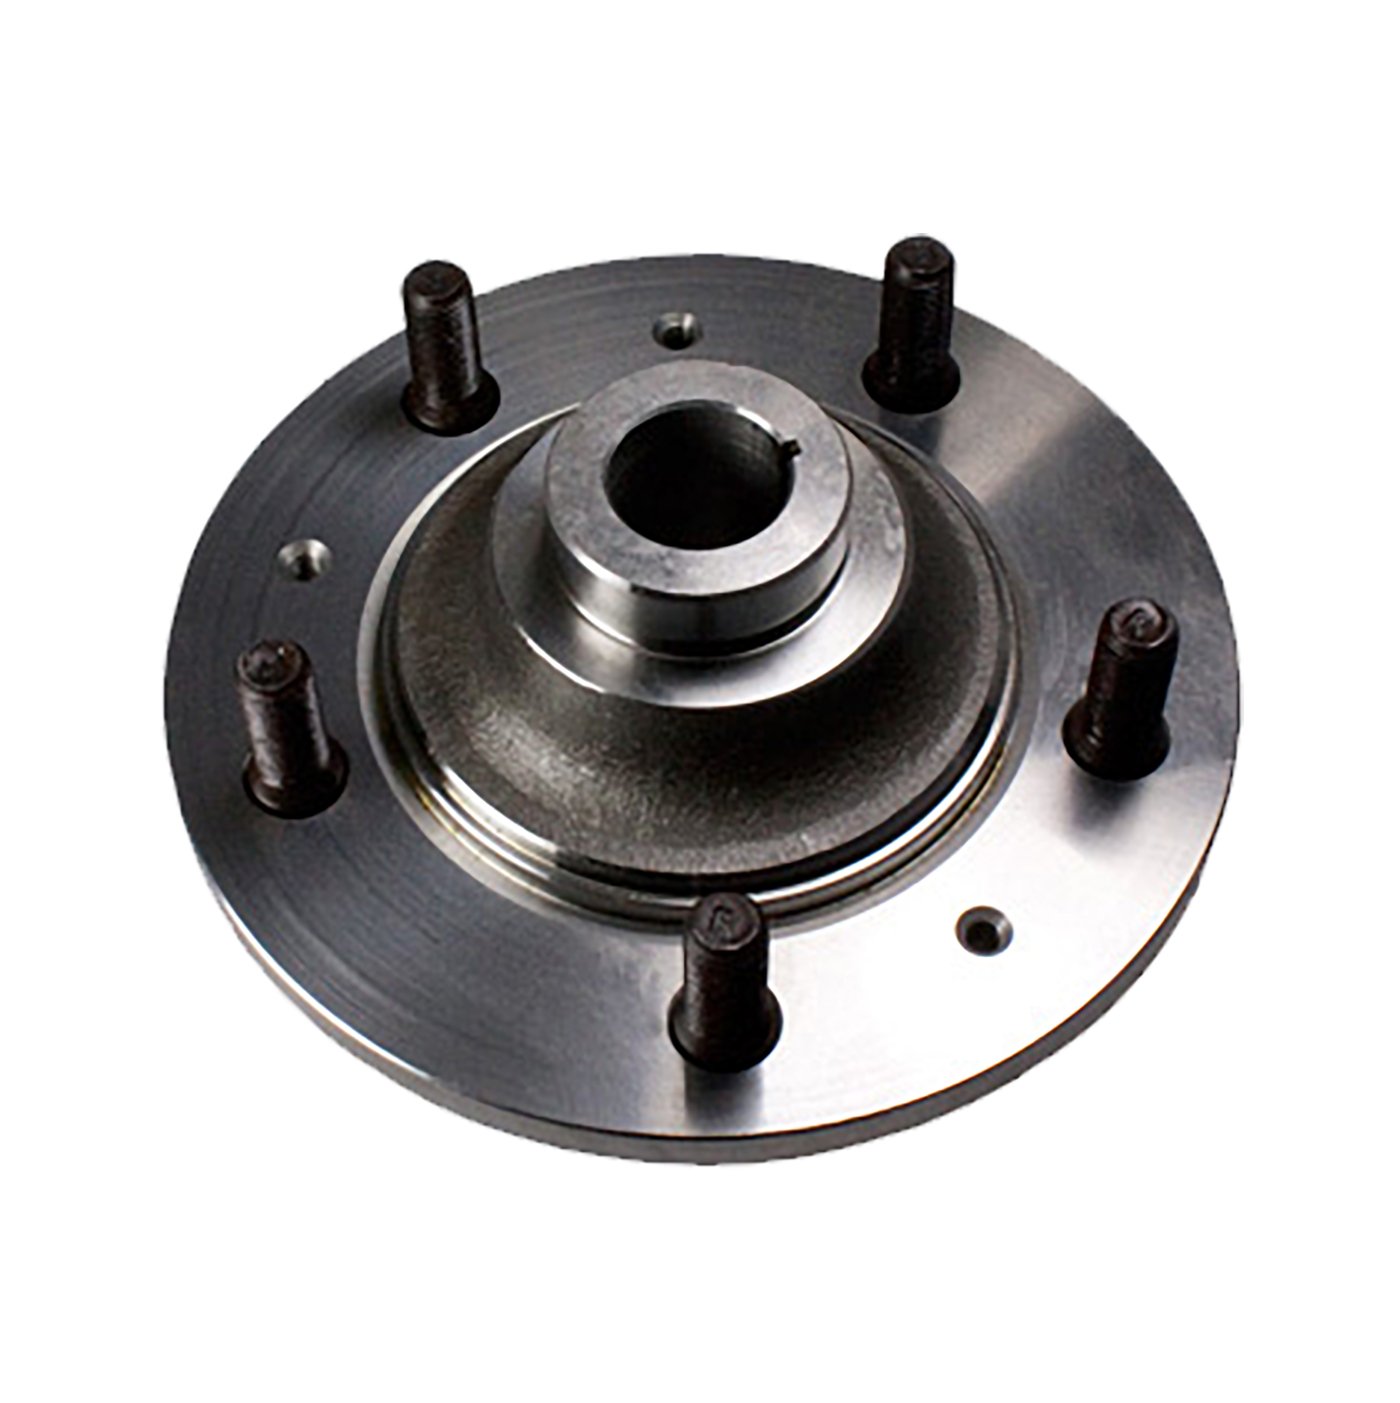 Two Piece Axle Hub For Model 20. Fits Stock Type Axle.